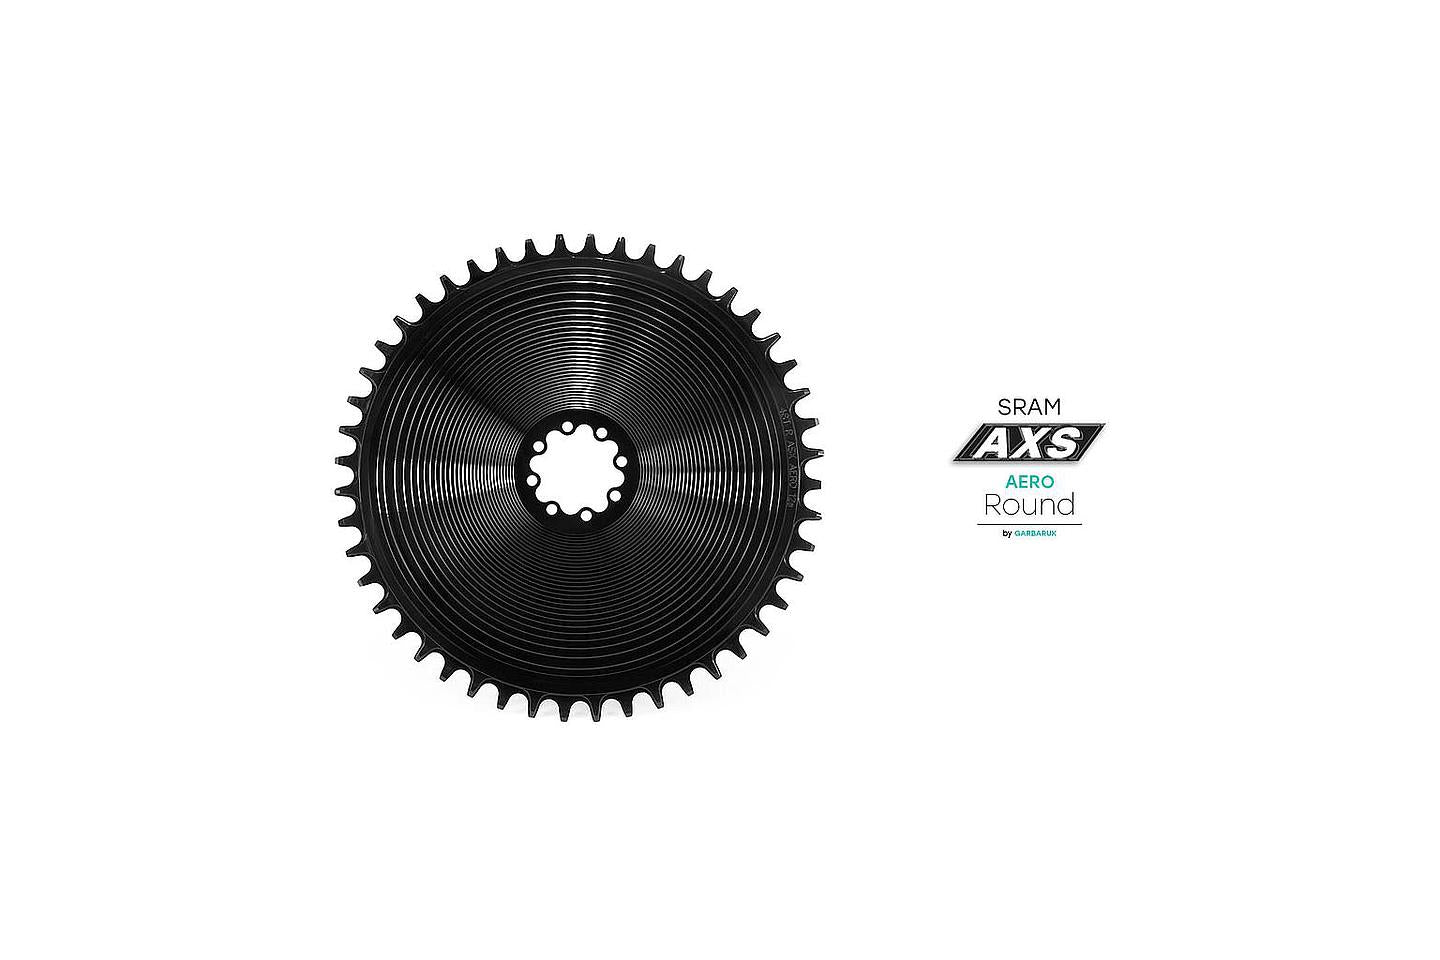 AXS Road/CX AERO Oval OUTLET